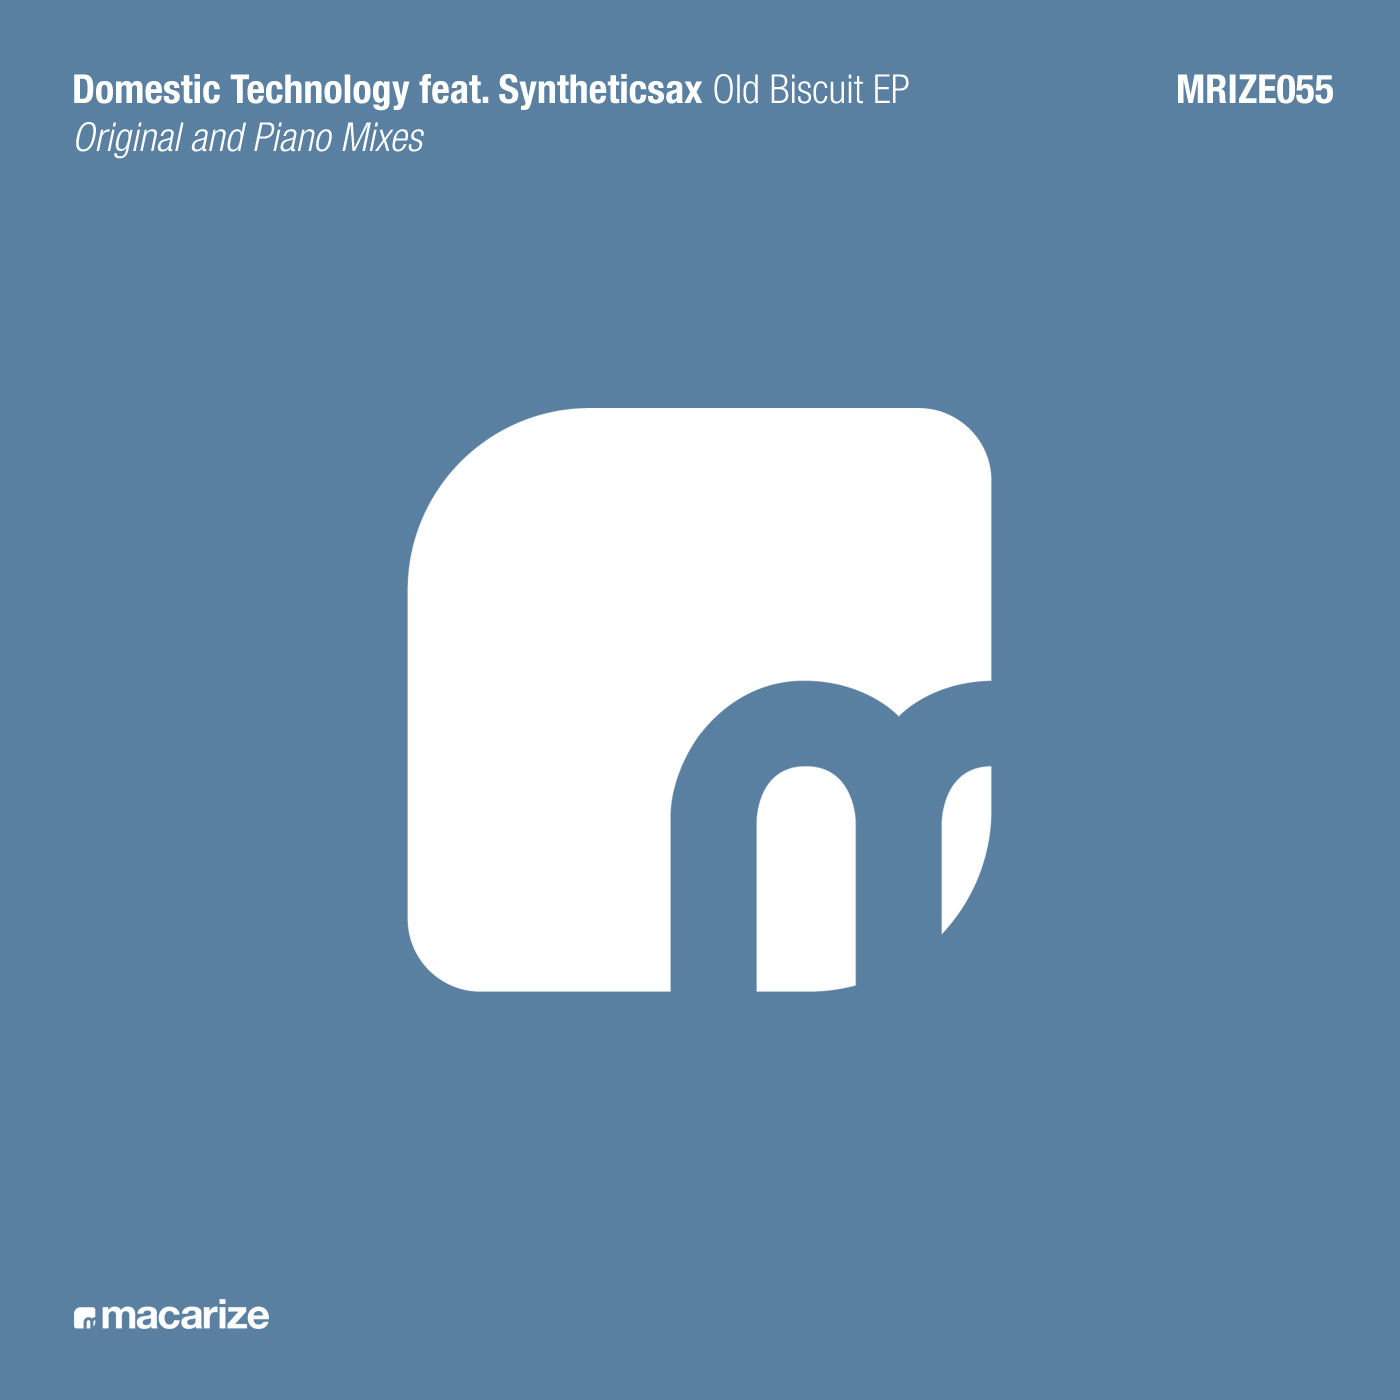 Domestic Technology Feat. Syntheticsax – Oldskool Biscuit EP